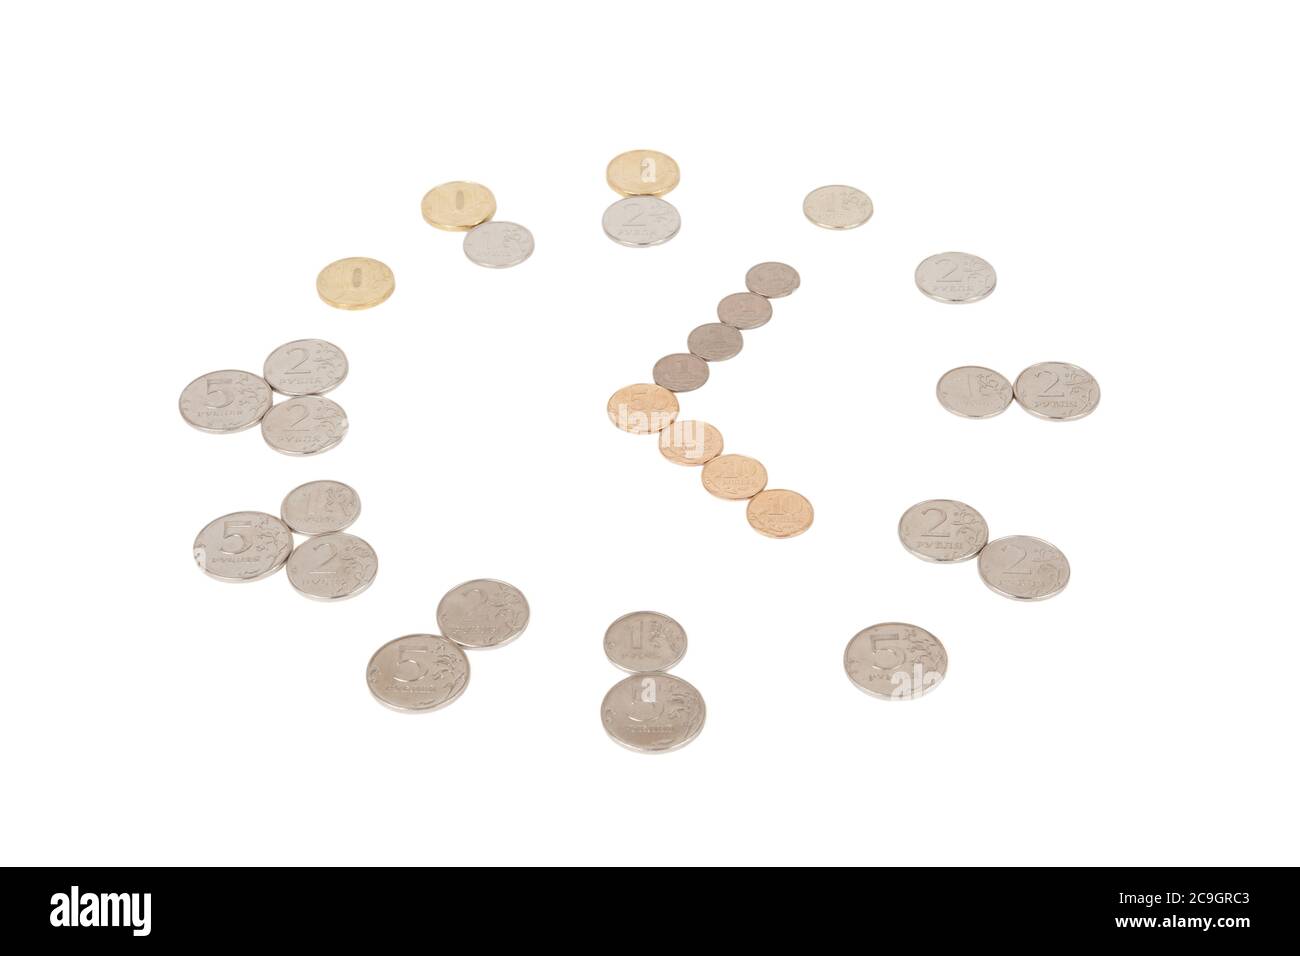 Coins laid out in the shape of a clock on a white background Stock Photo